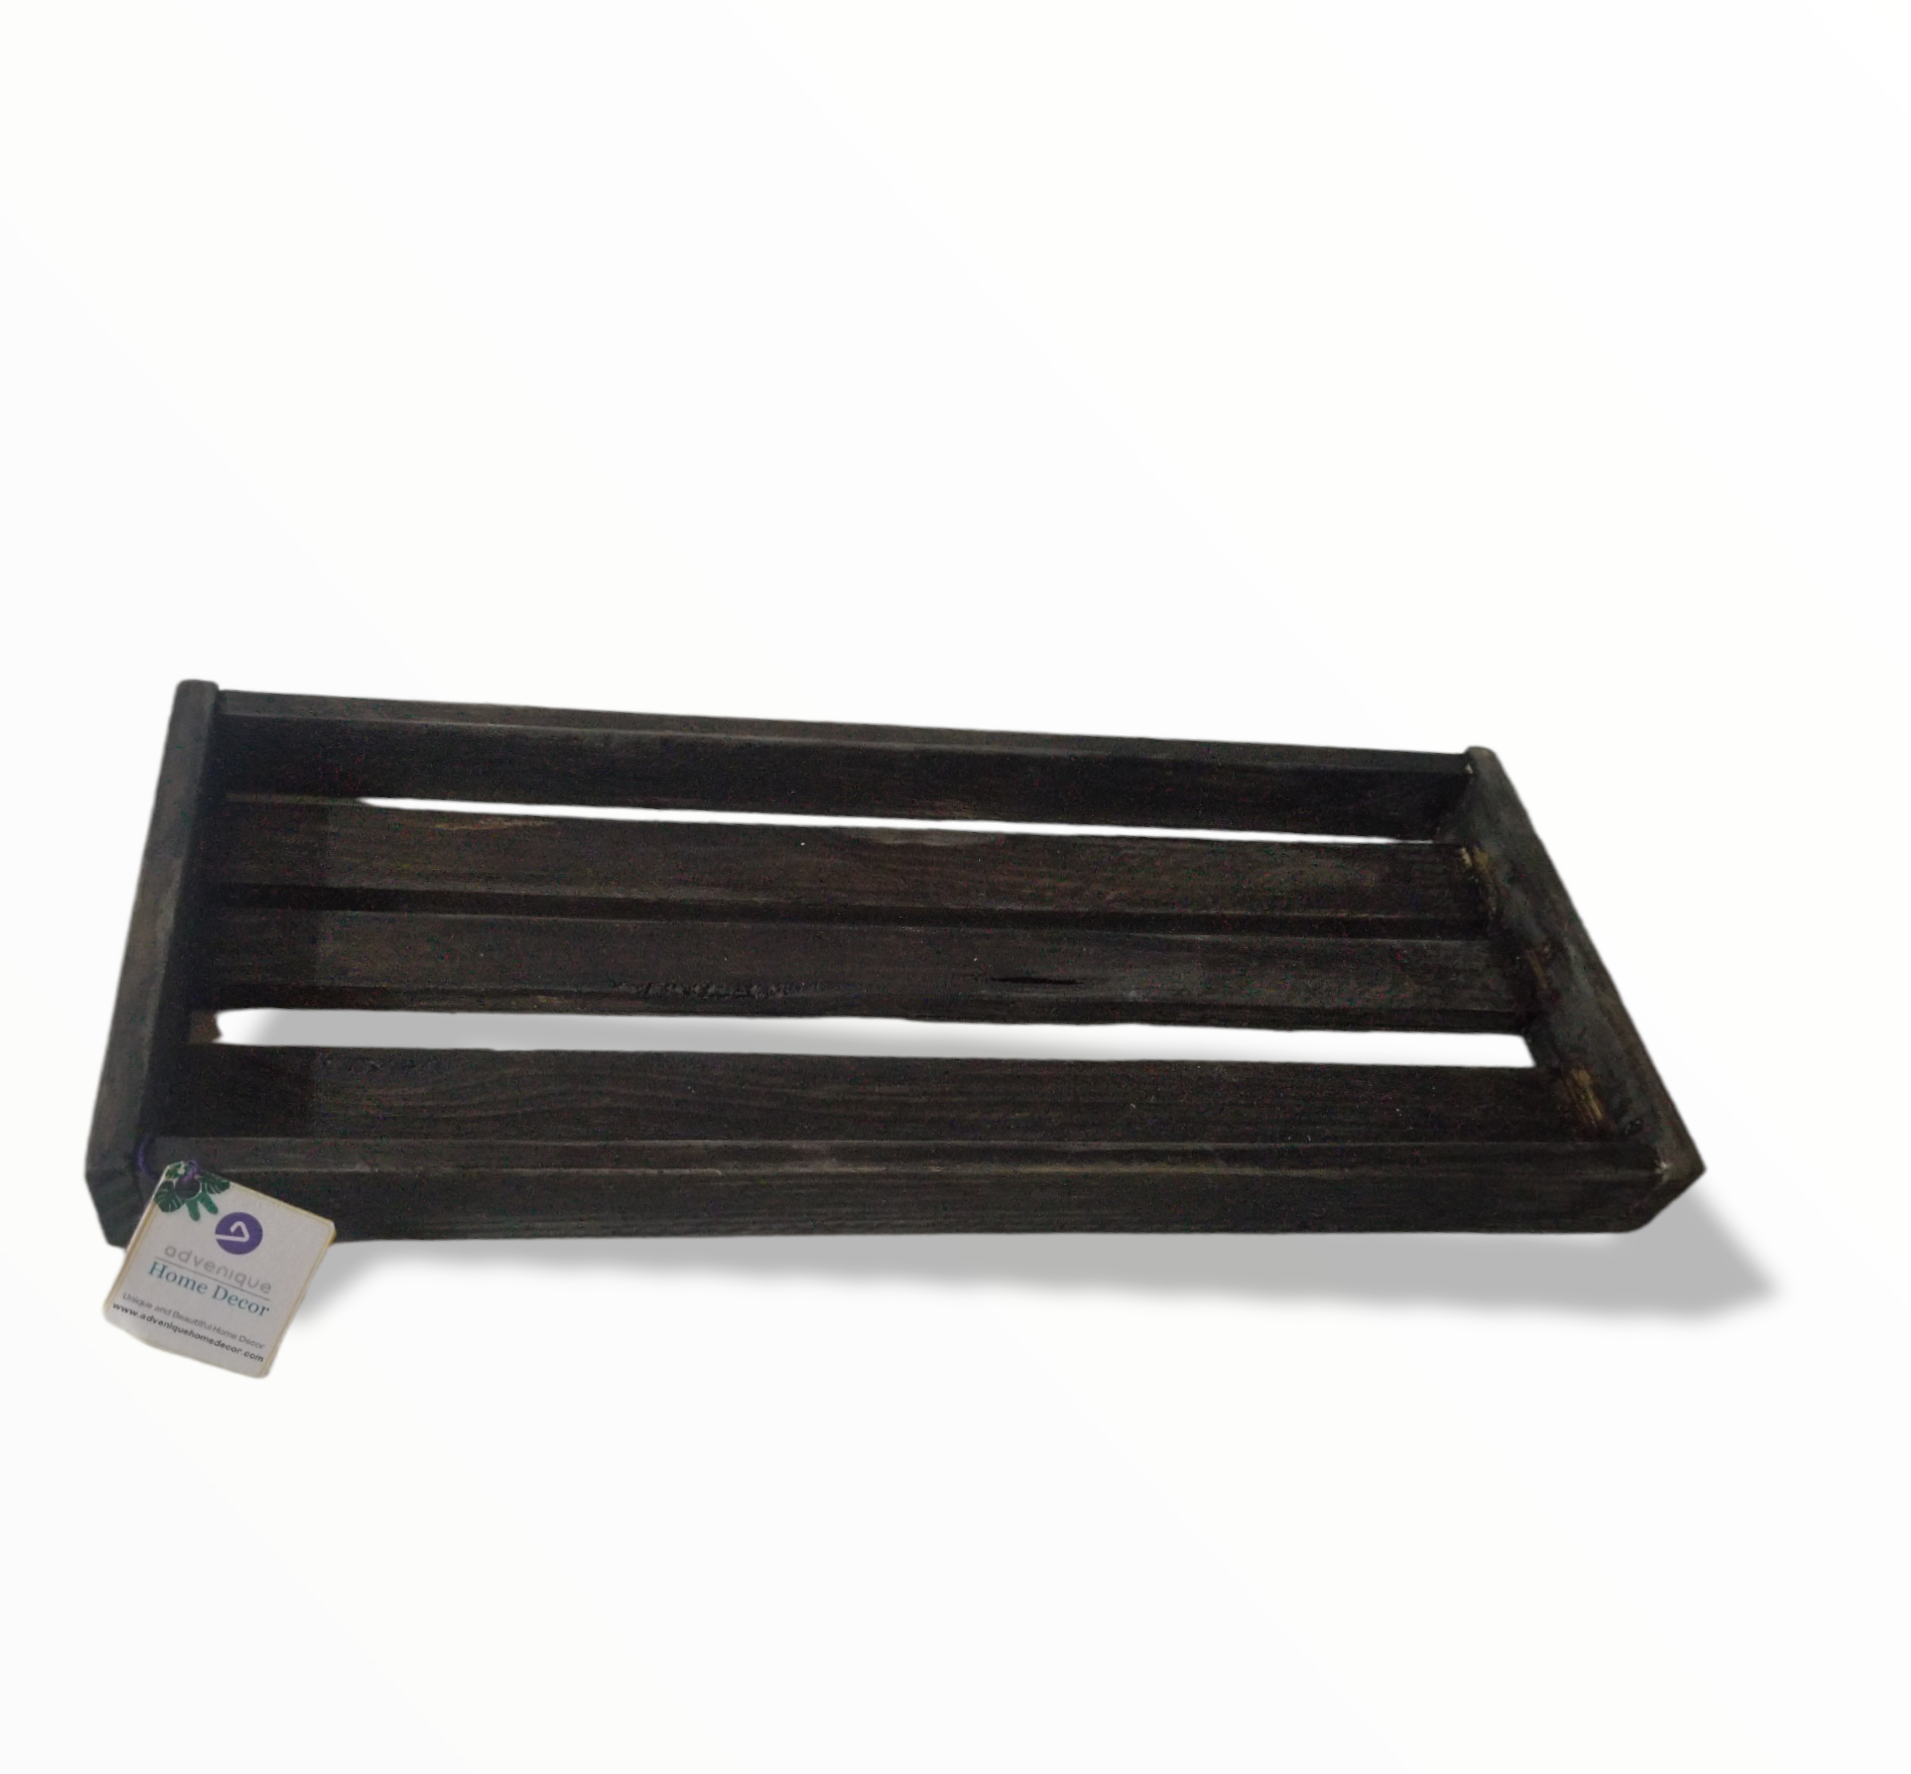 Rustic Dark Brown Wooden Trays by Fiona Hall - Advenique Home Decor